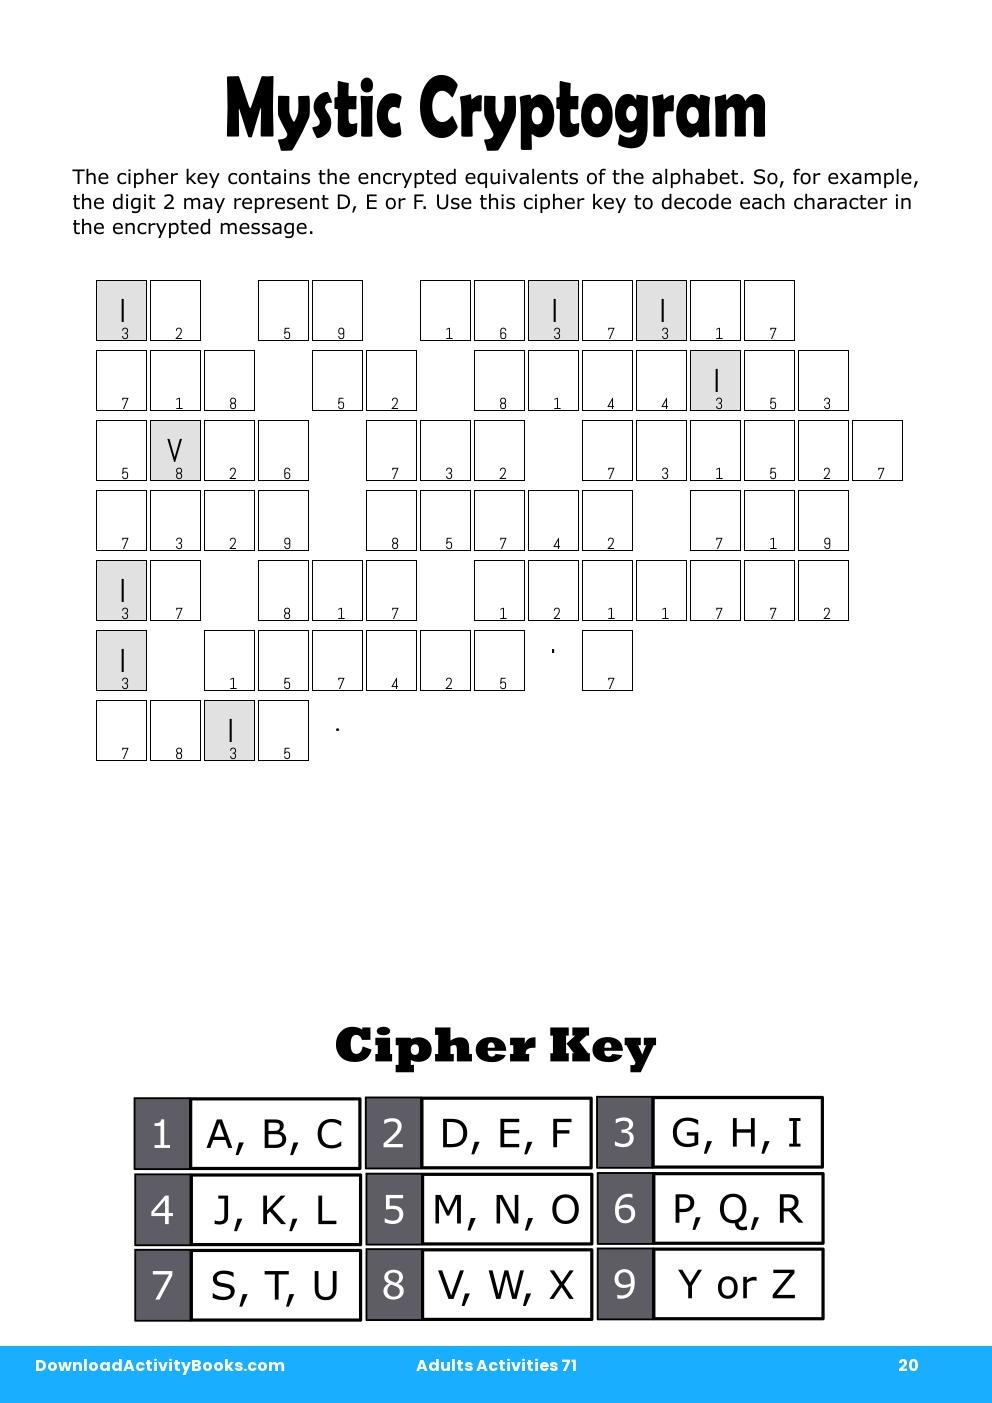 Mystic Cryptogram in Adults Activities 71